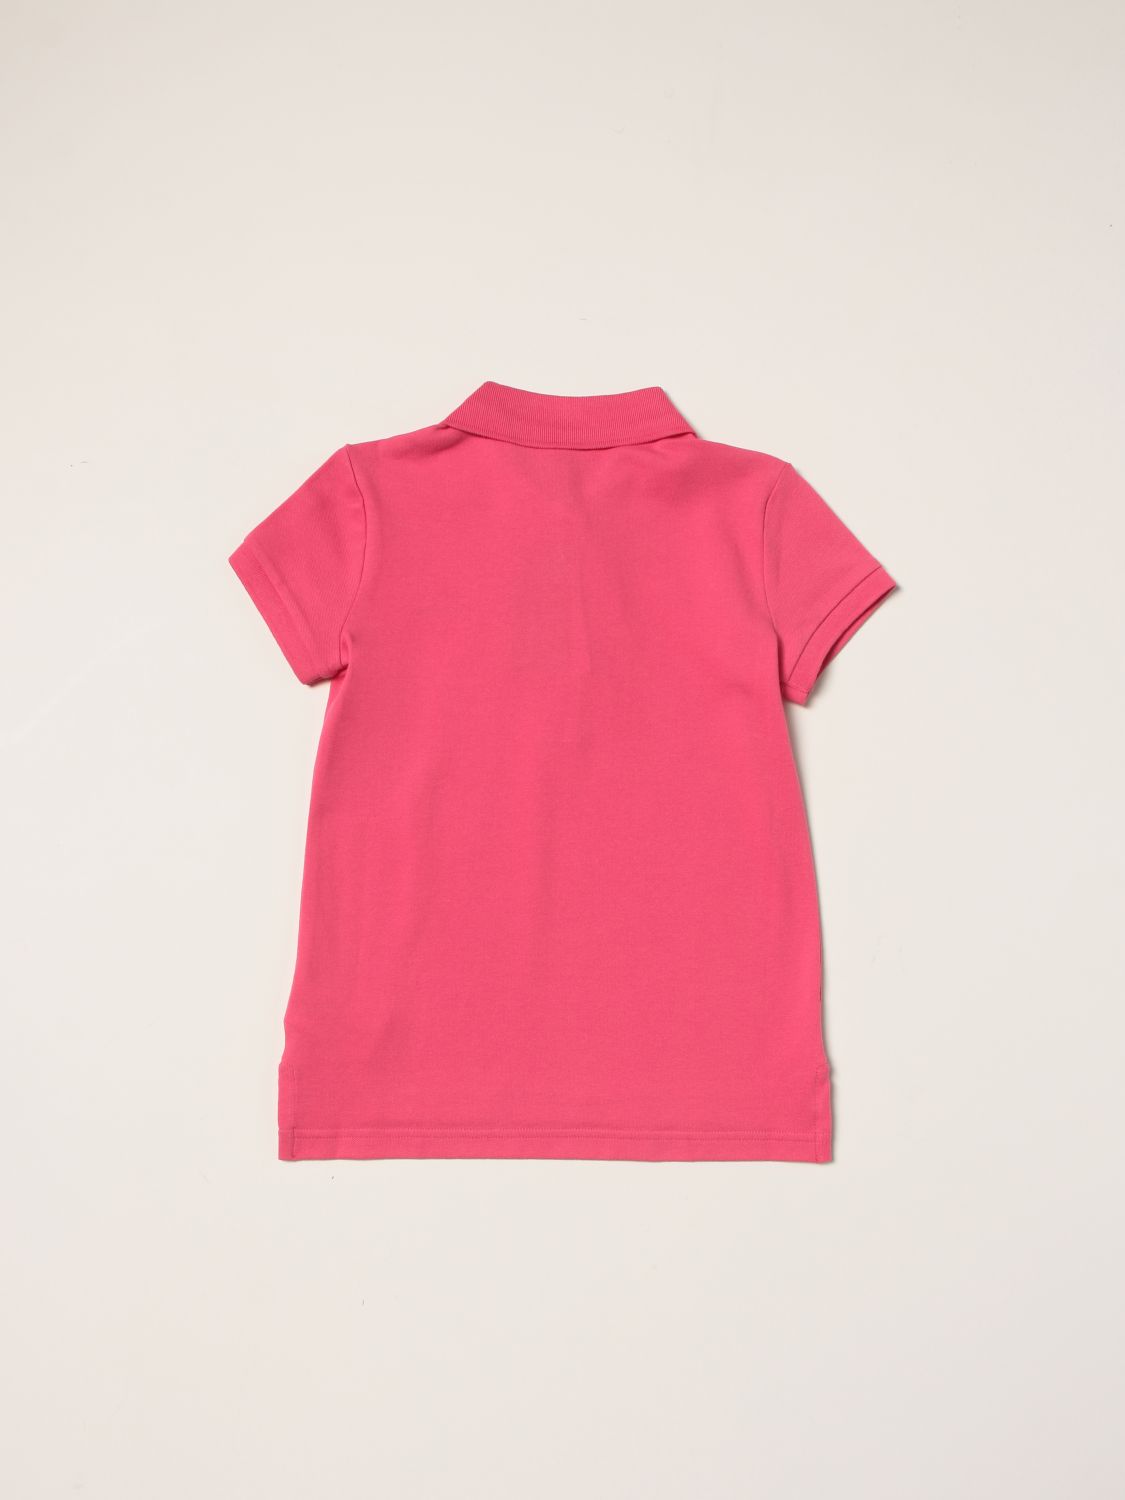 Polo Polo Ralph Lauren: Polo Ralph Lauren Mädchen Polo pink 2